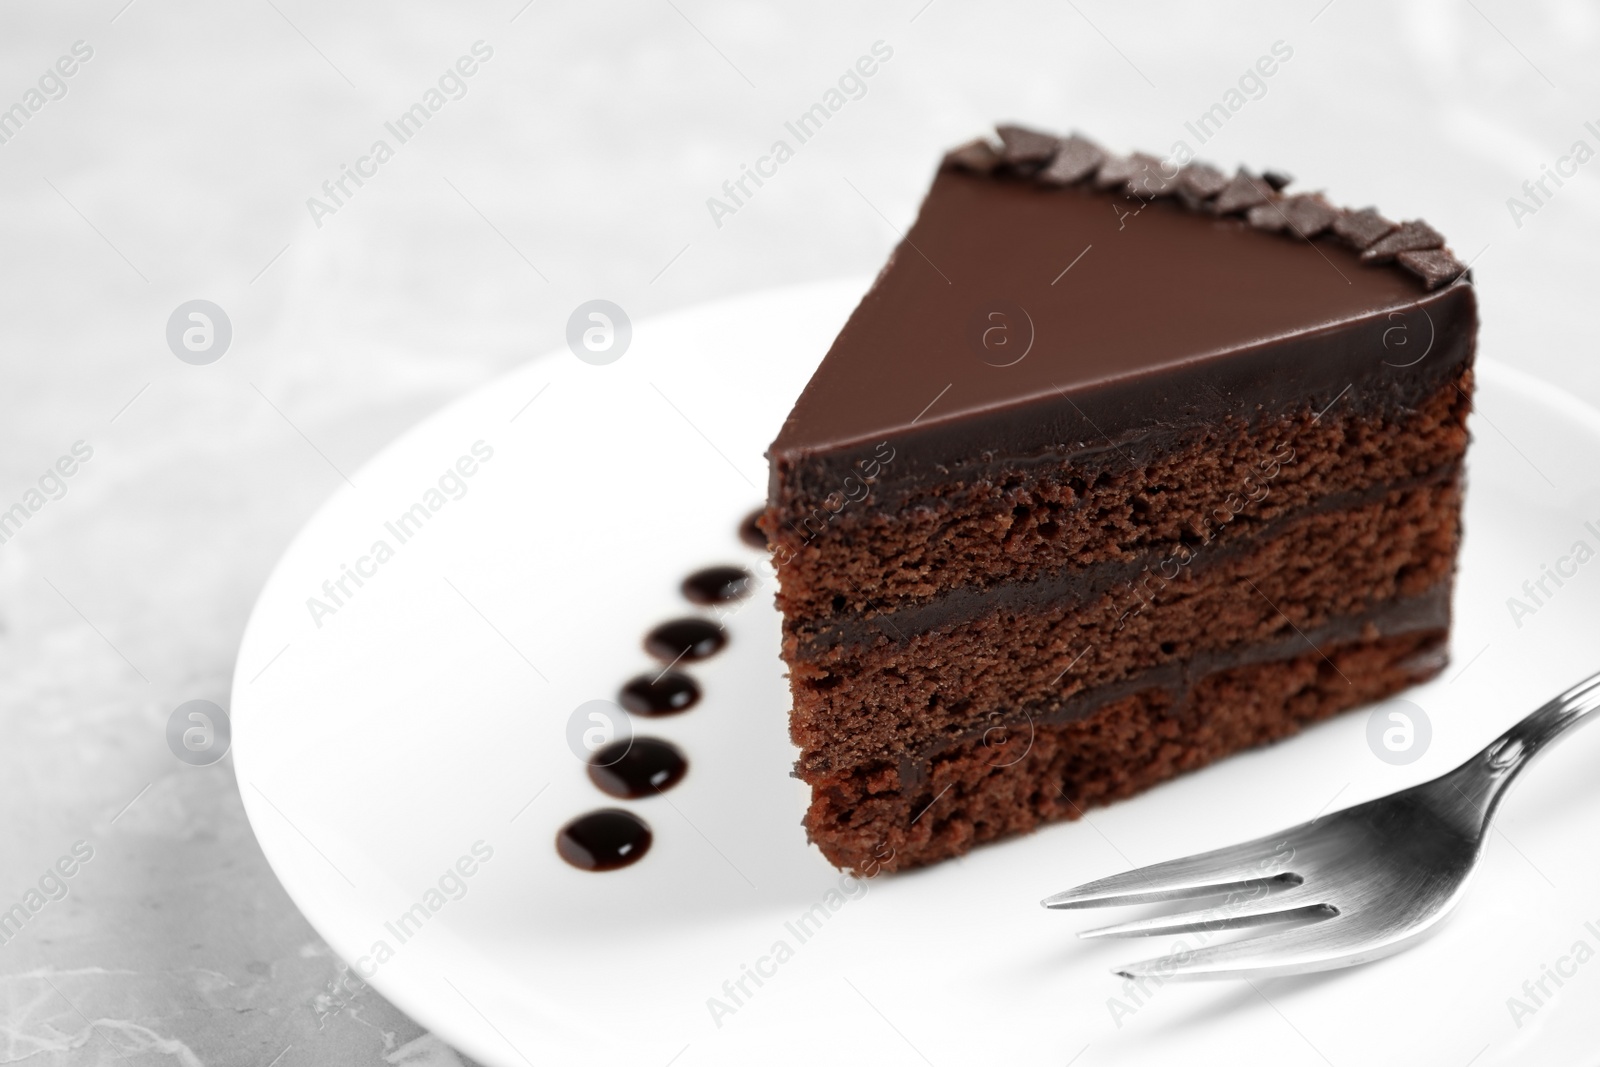 Photo of Piece of tasty chocolate cake served on plate